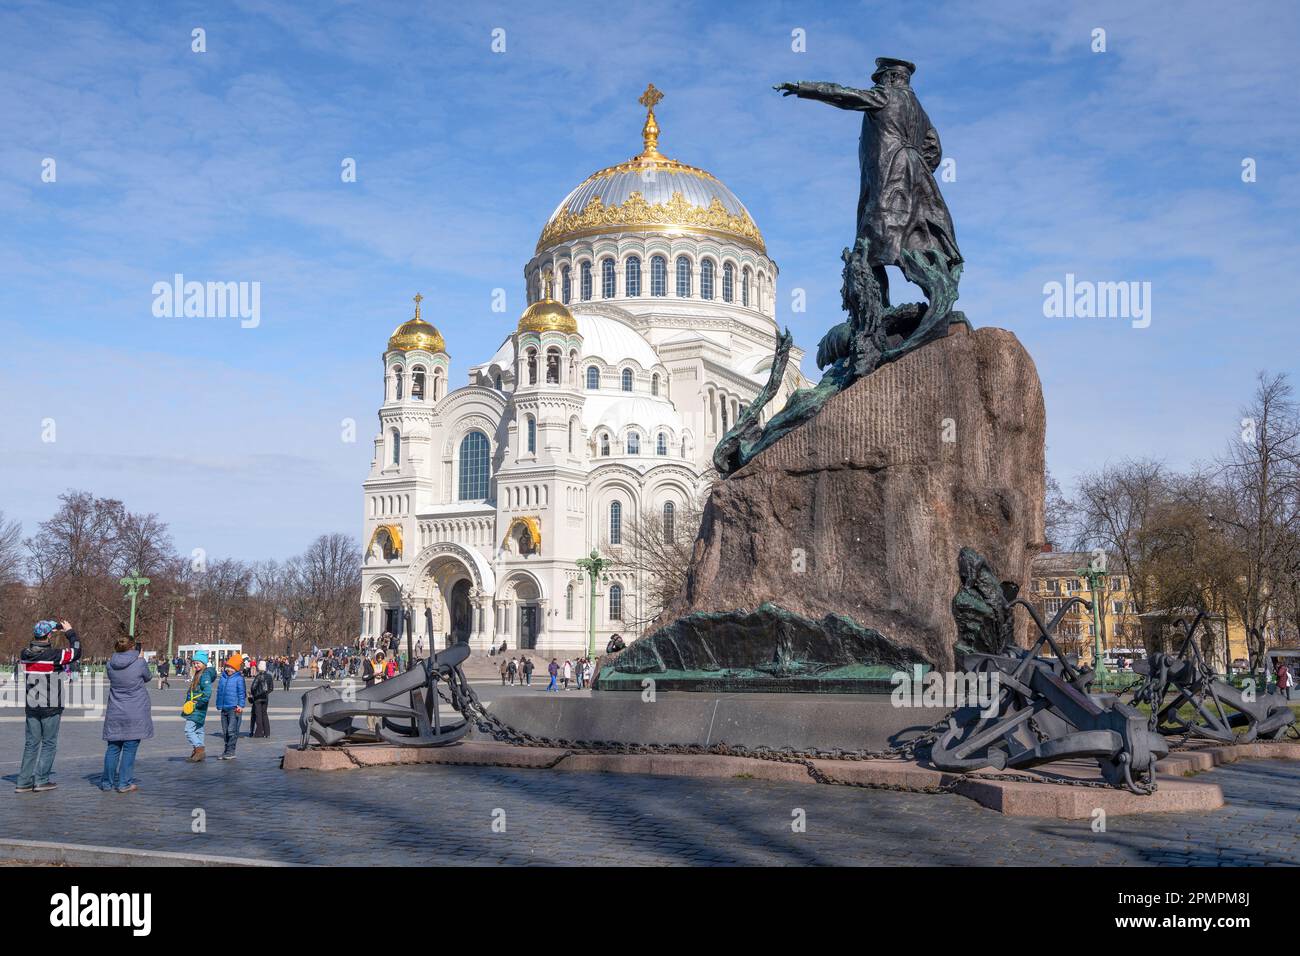 KRONSHTADT, RUSSIA - MAY 01, 2022: Kronstadt walks. Sunny May day at the monument to the Russian admiral S.O. Makarov. Anchor Square Stock Photo